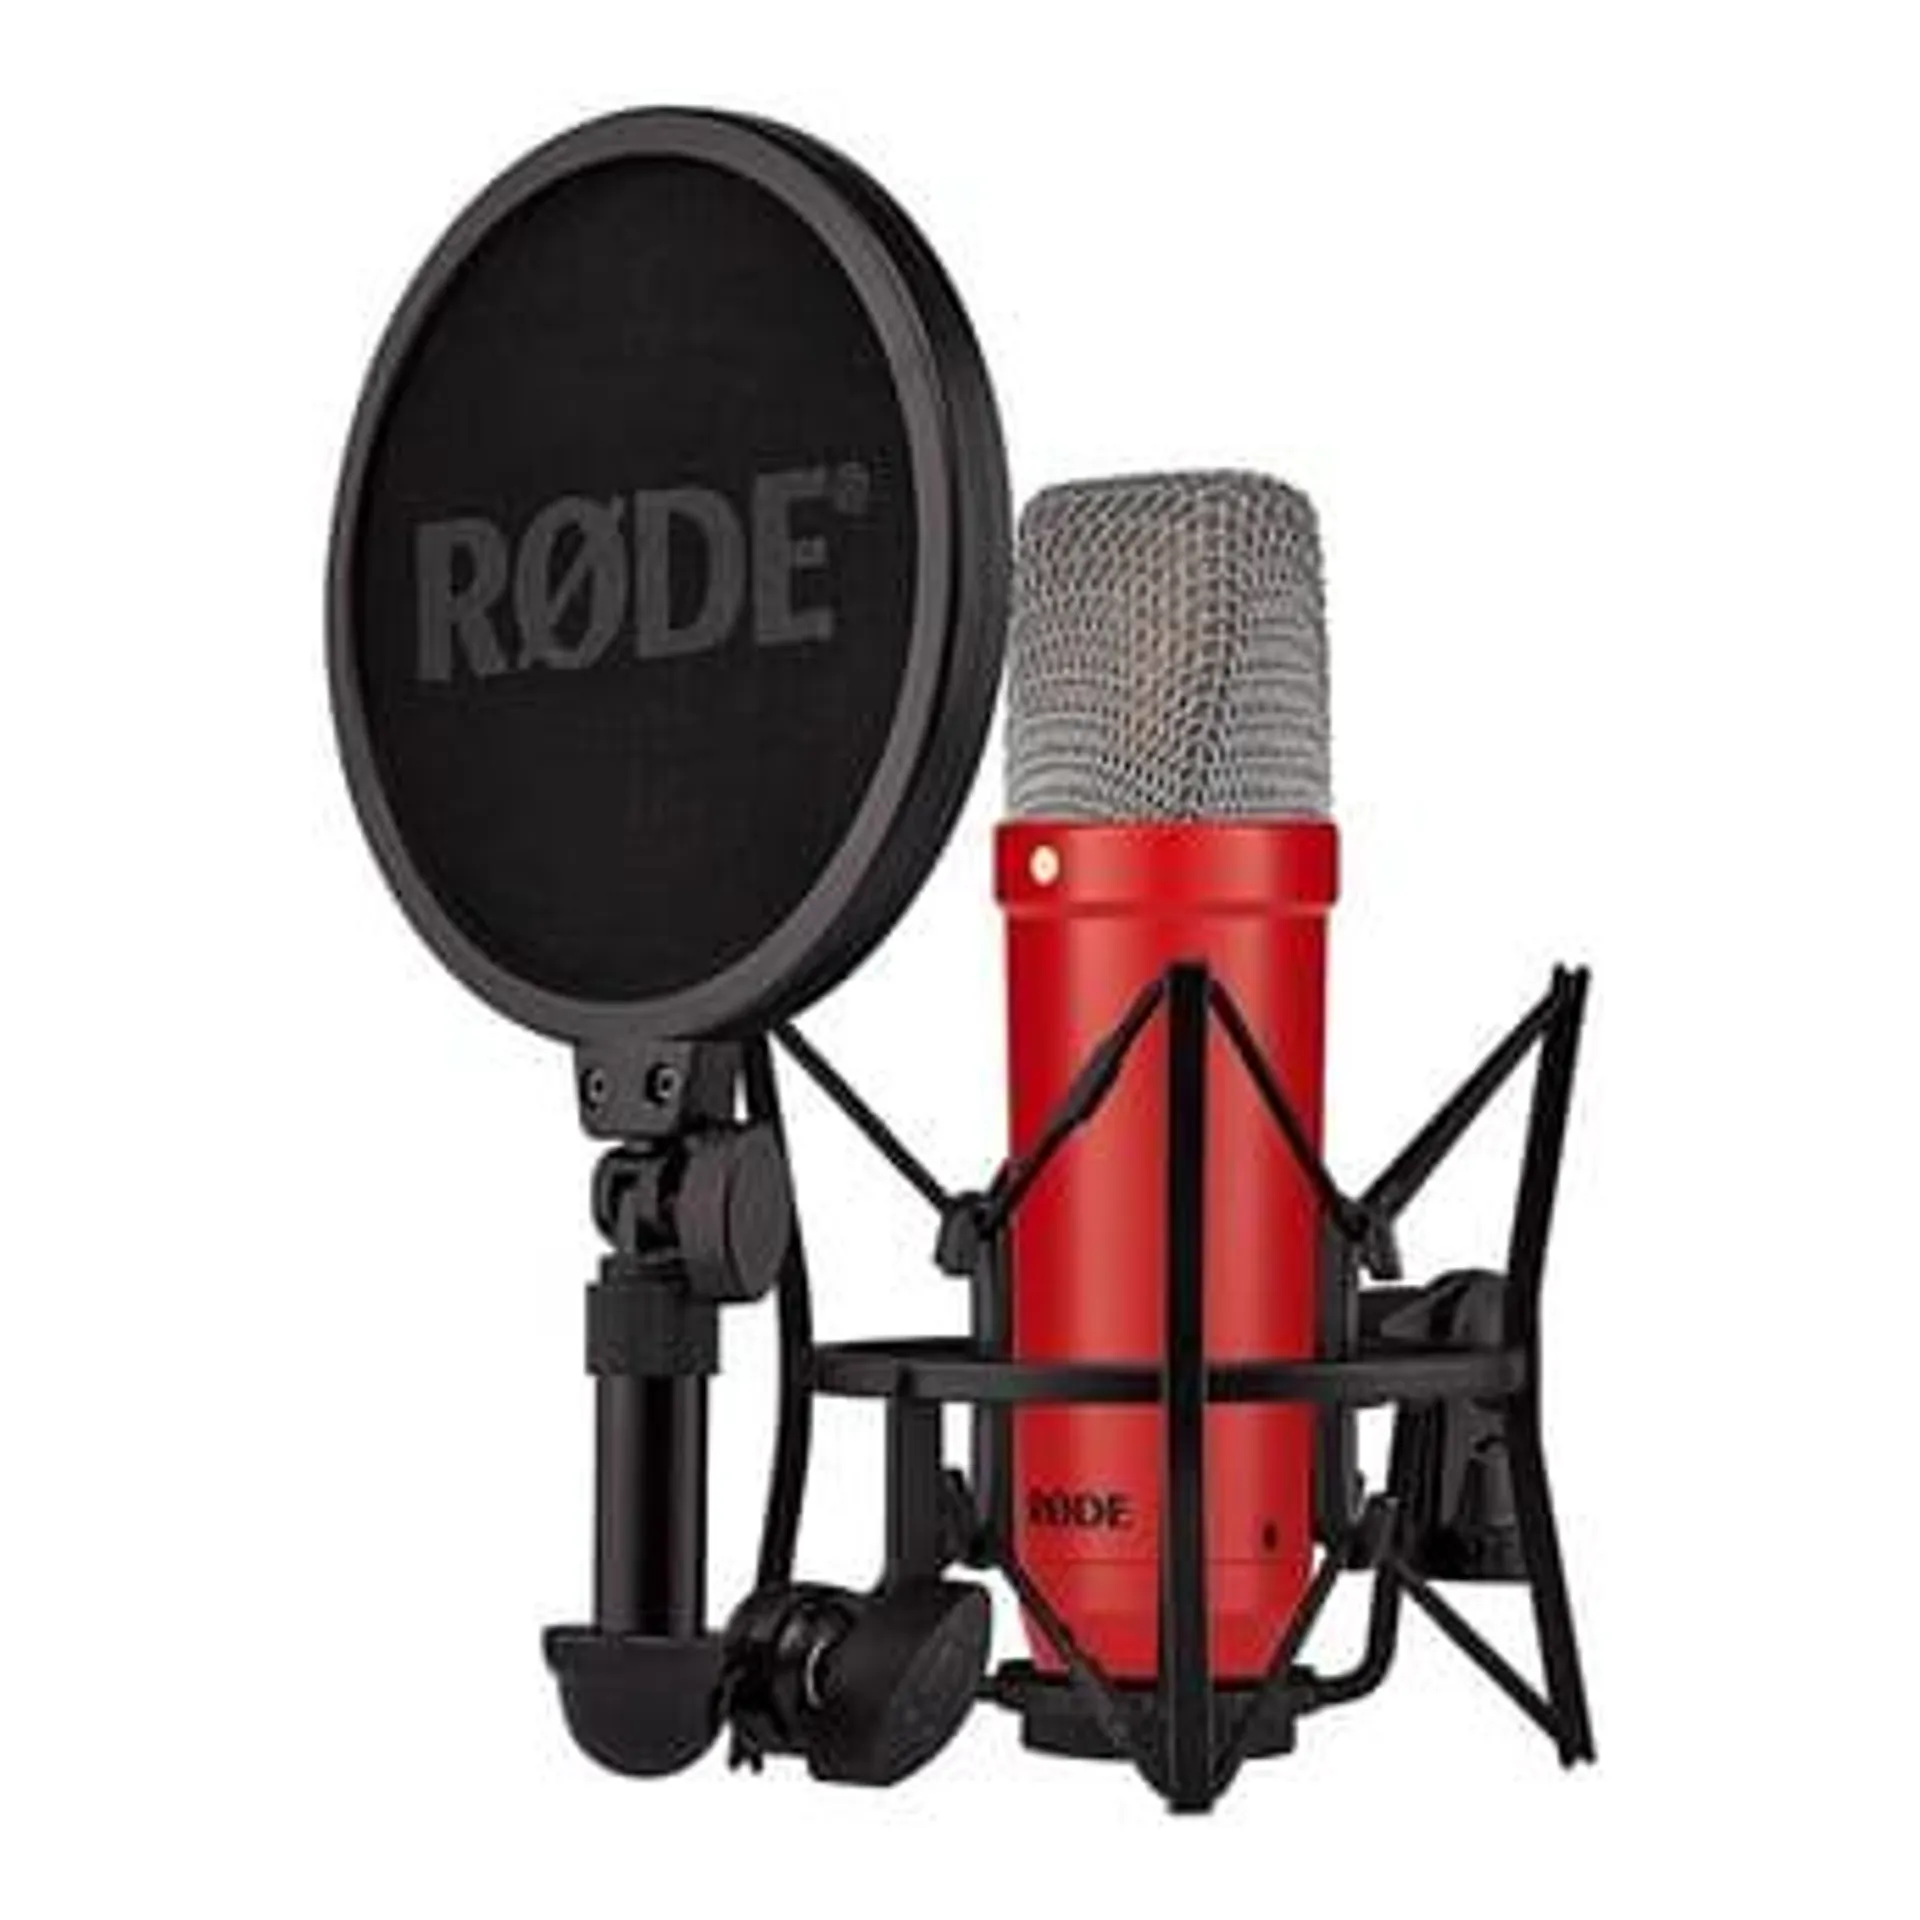 RODE NT1 Signature Series Condenser Microphone (Red)